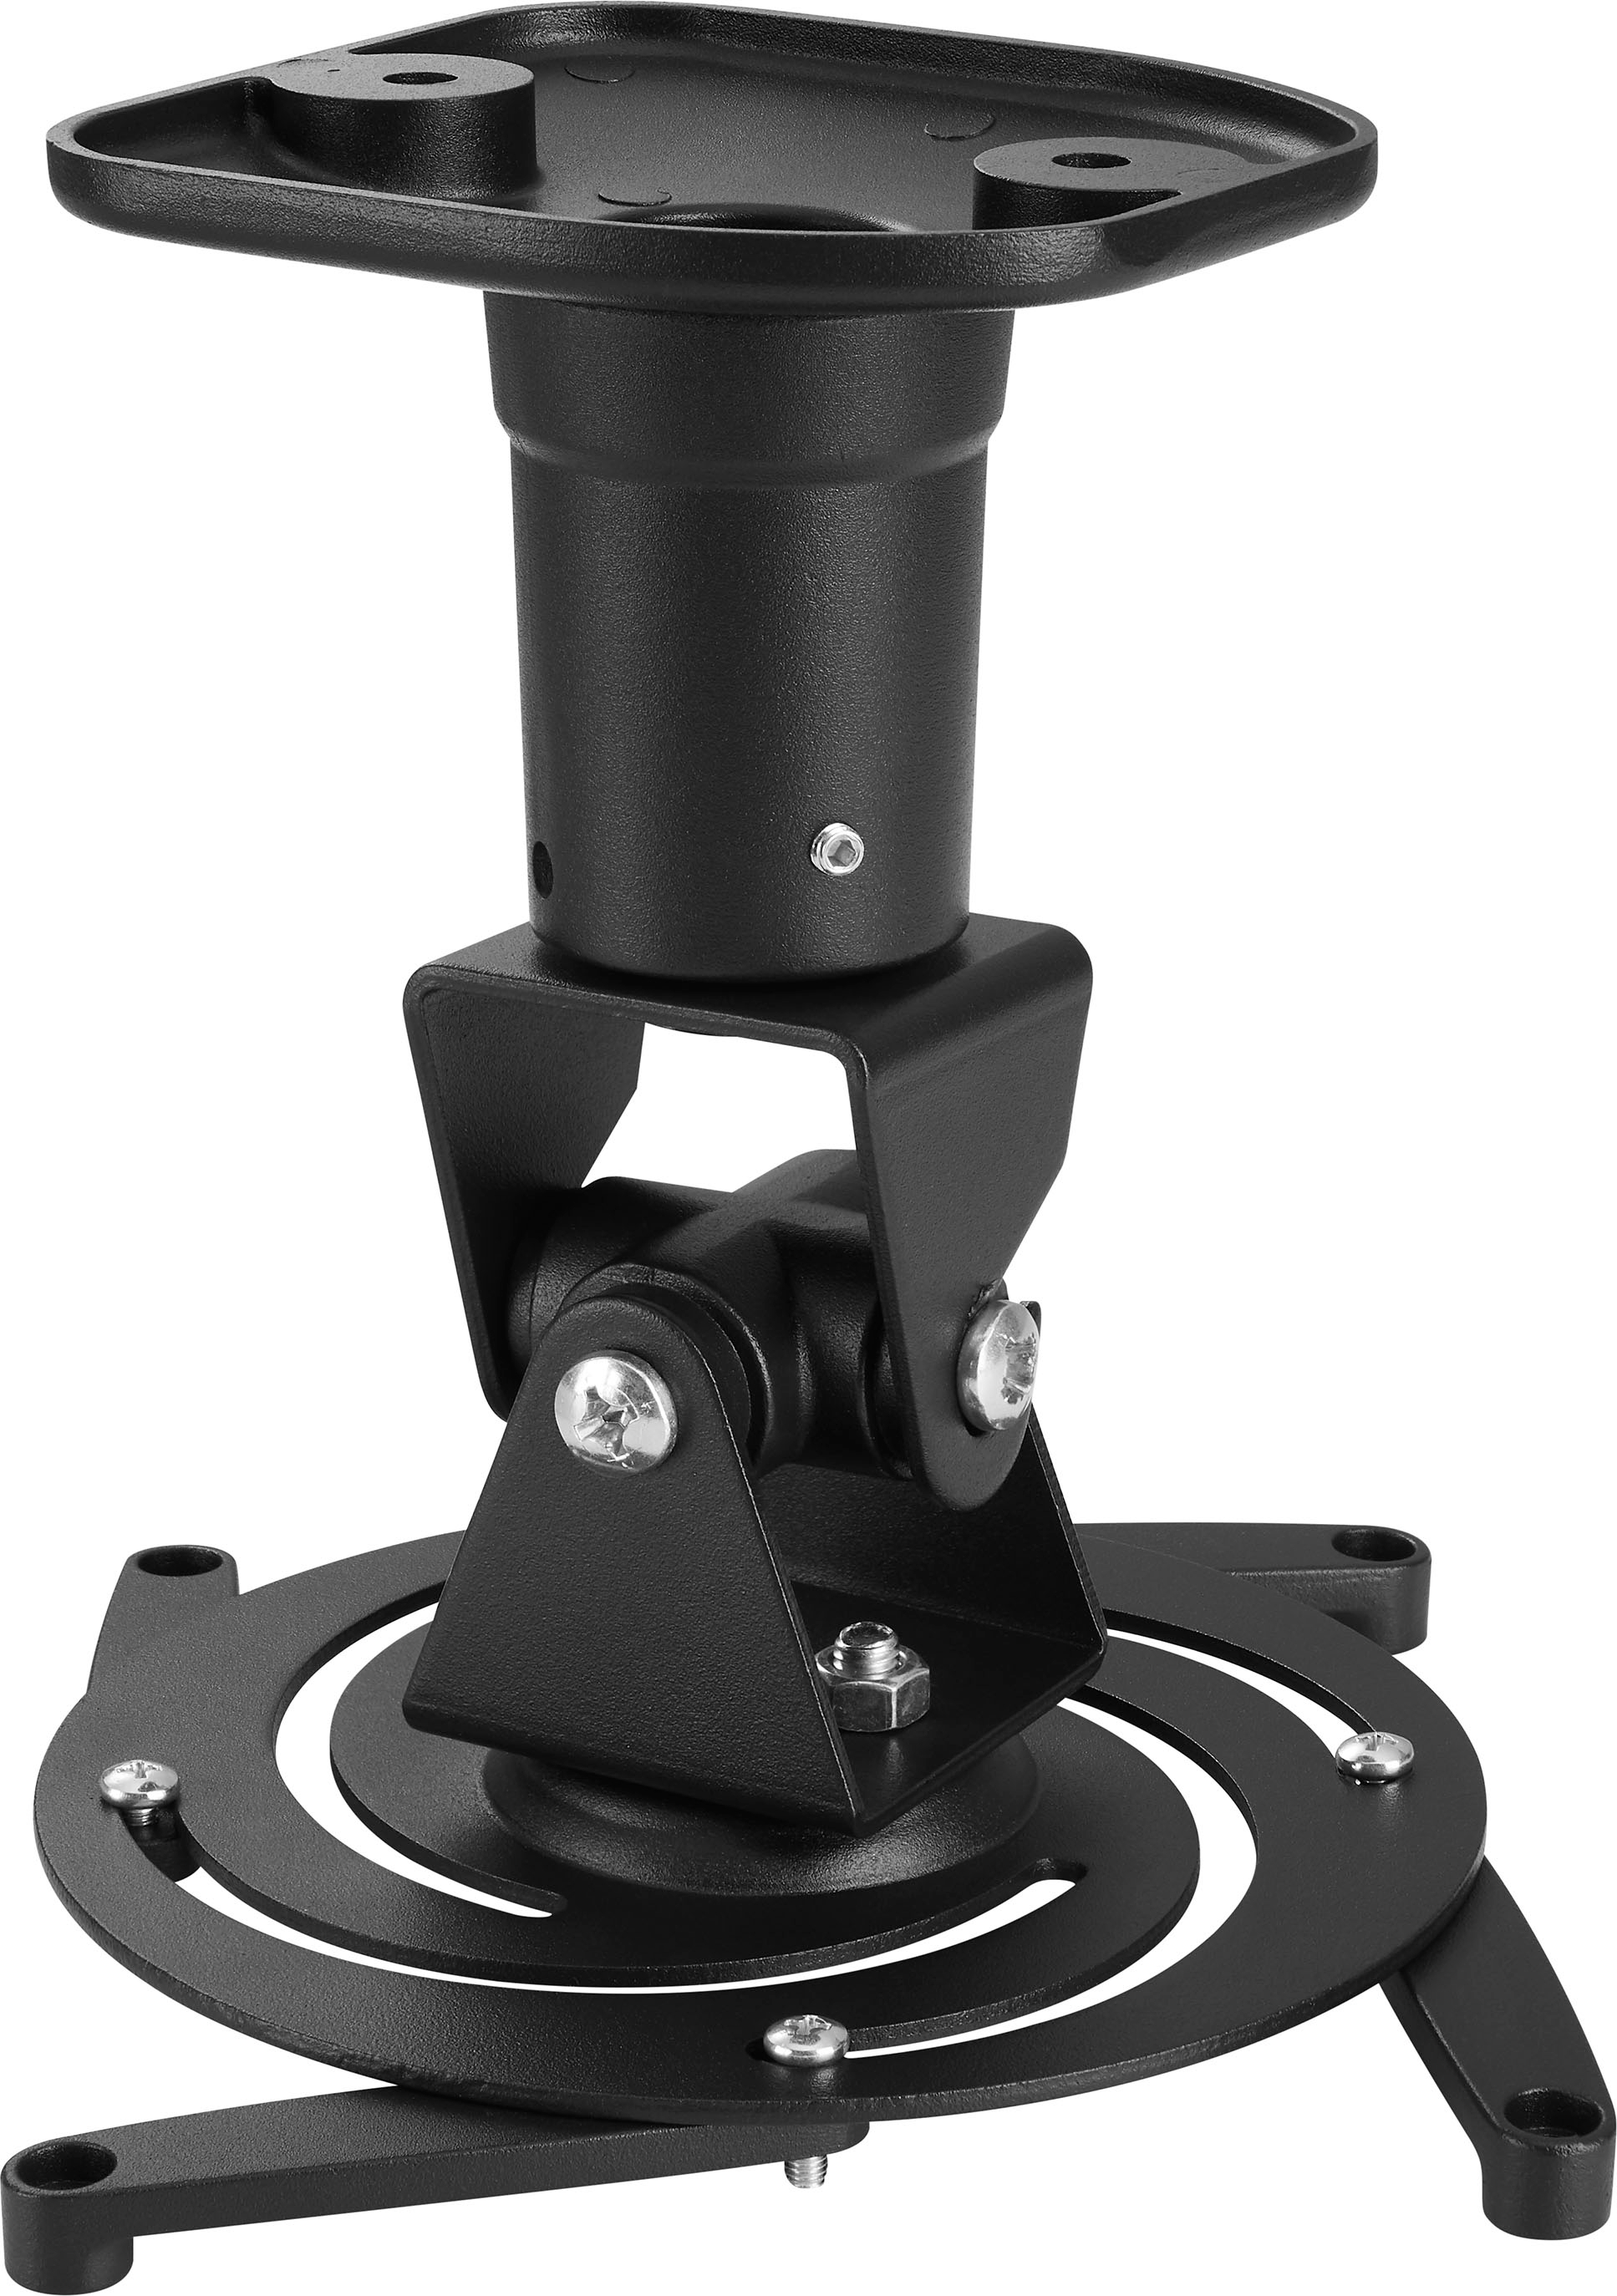 Insignia - Universal Projector Ceiling Mount - Black